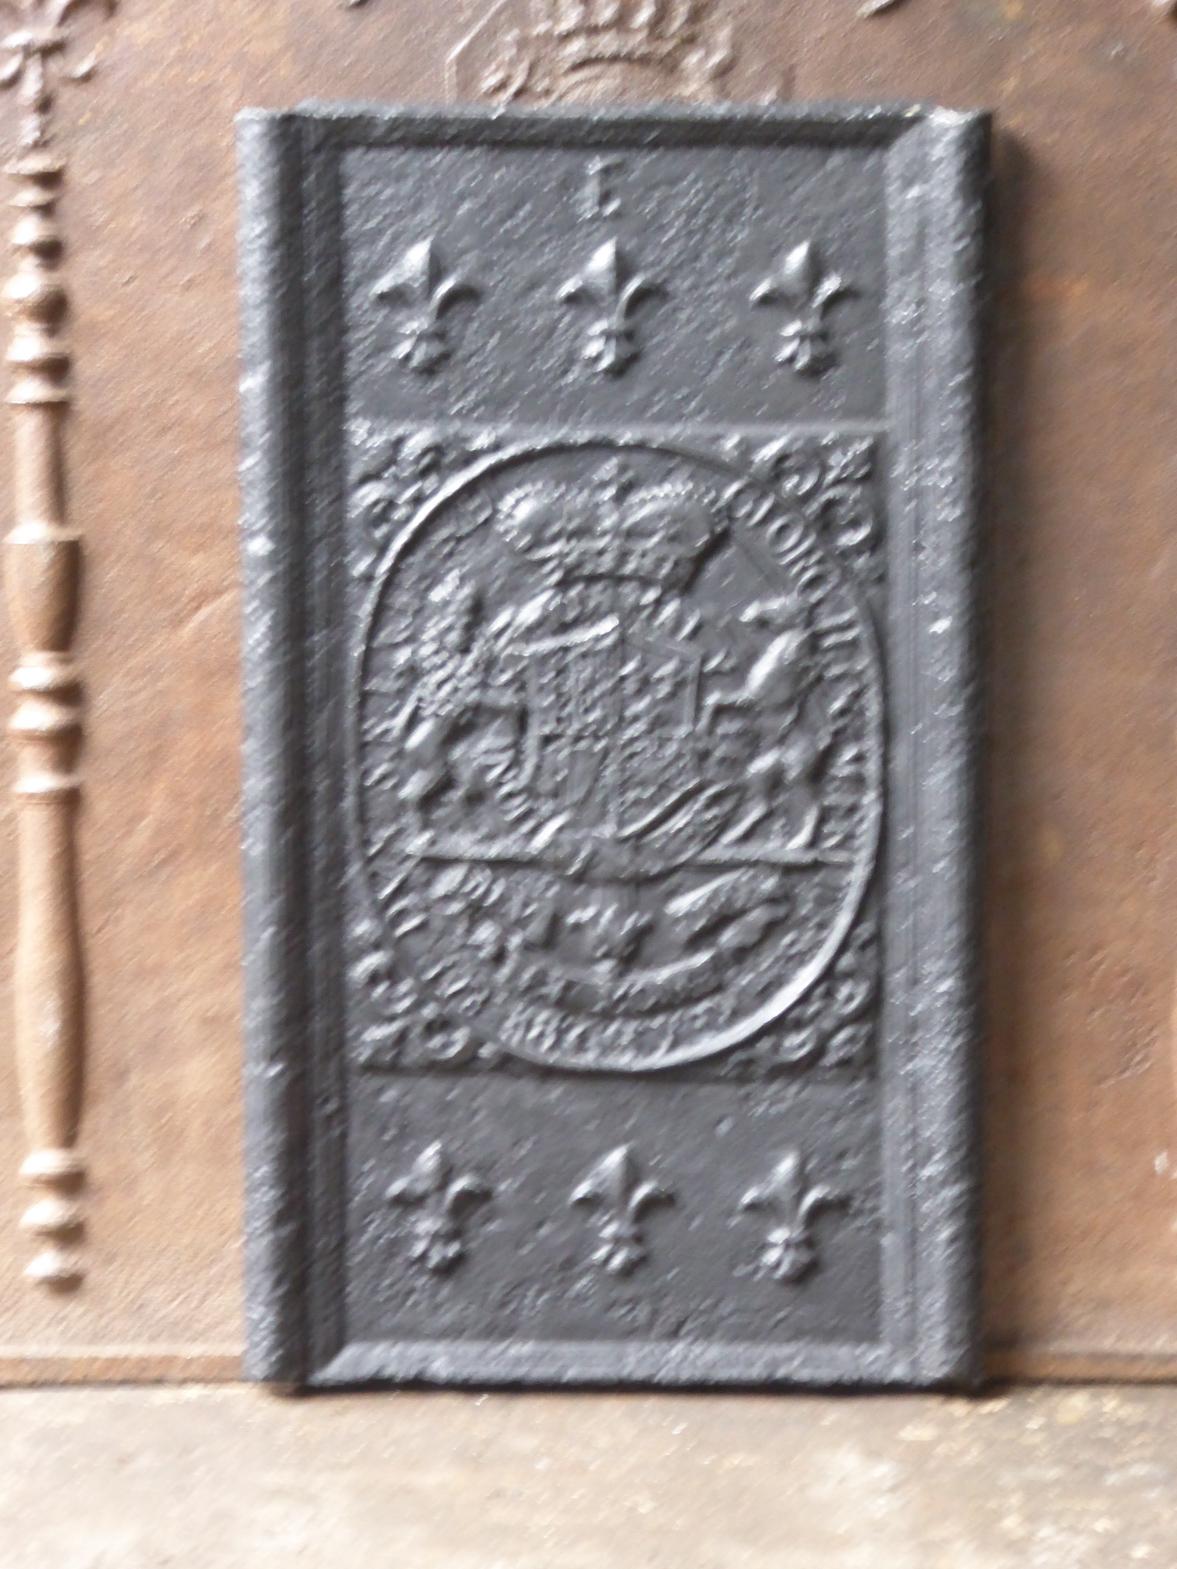 17th - 18th Century German Louis XIV period fireback with an unknown coat of arms.

The fireback is made of cast iron and has a black / pewter patina. The fireback is in a good condition and does not have cracks.







